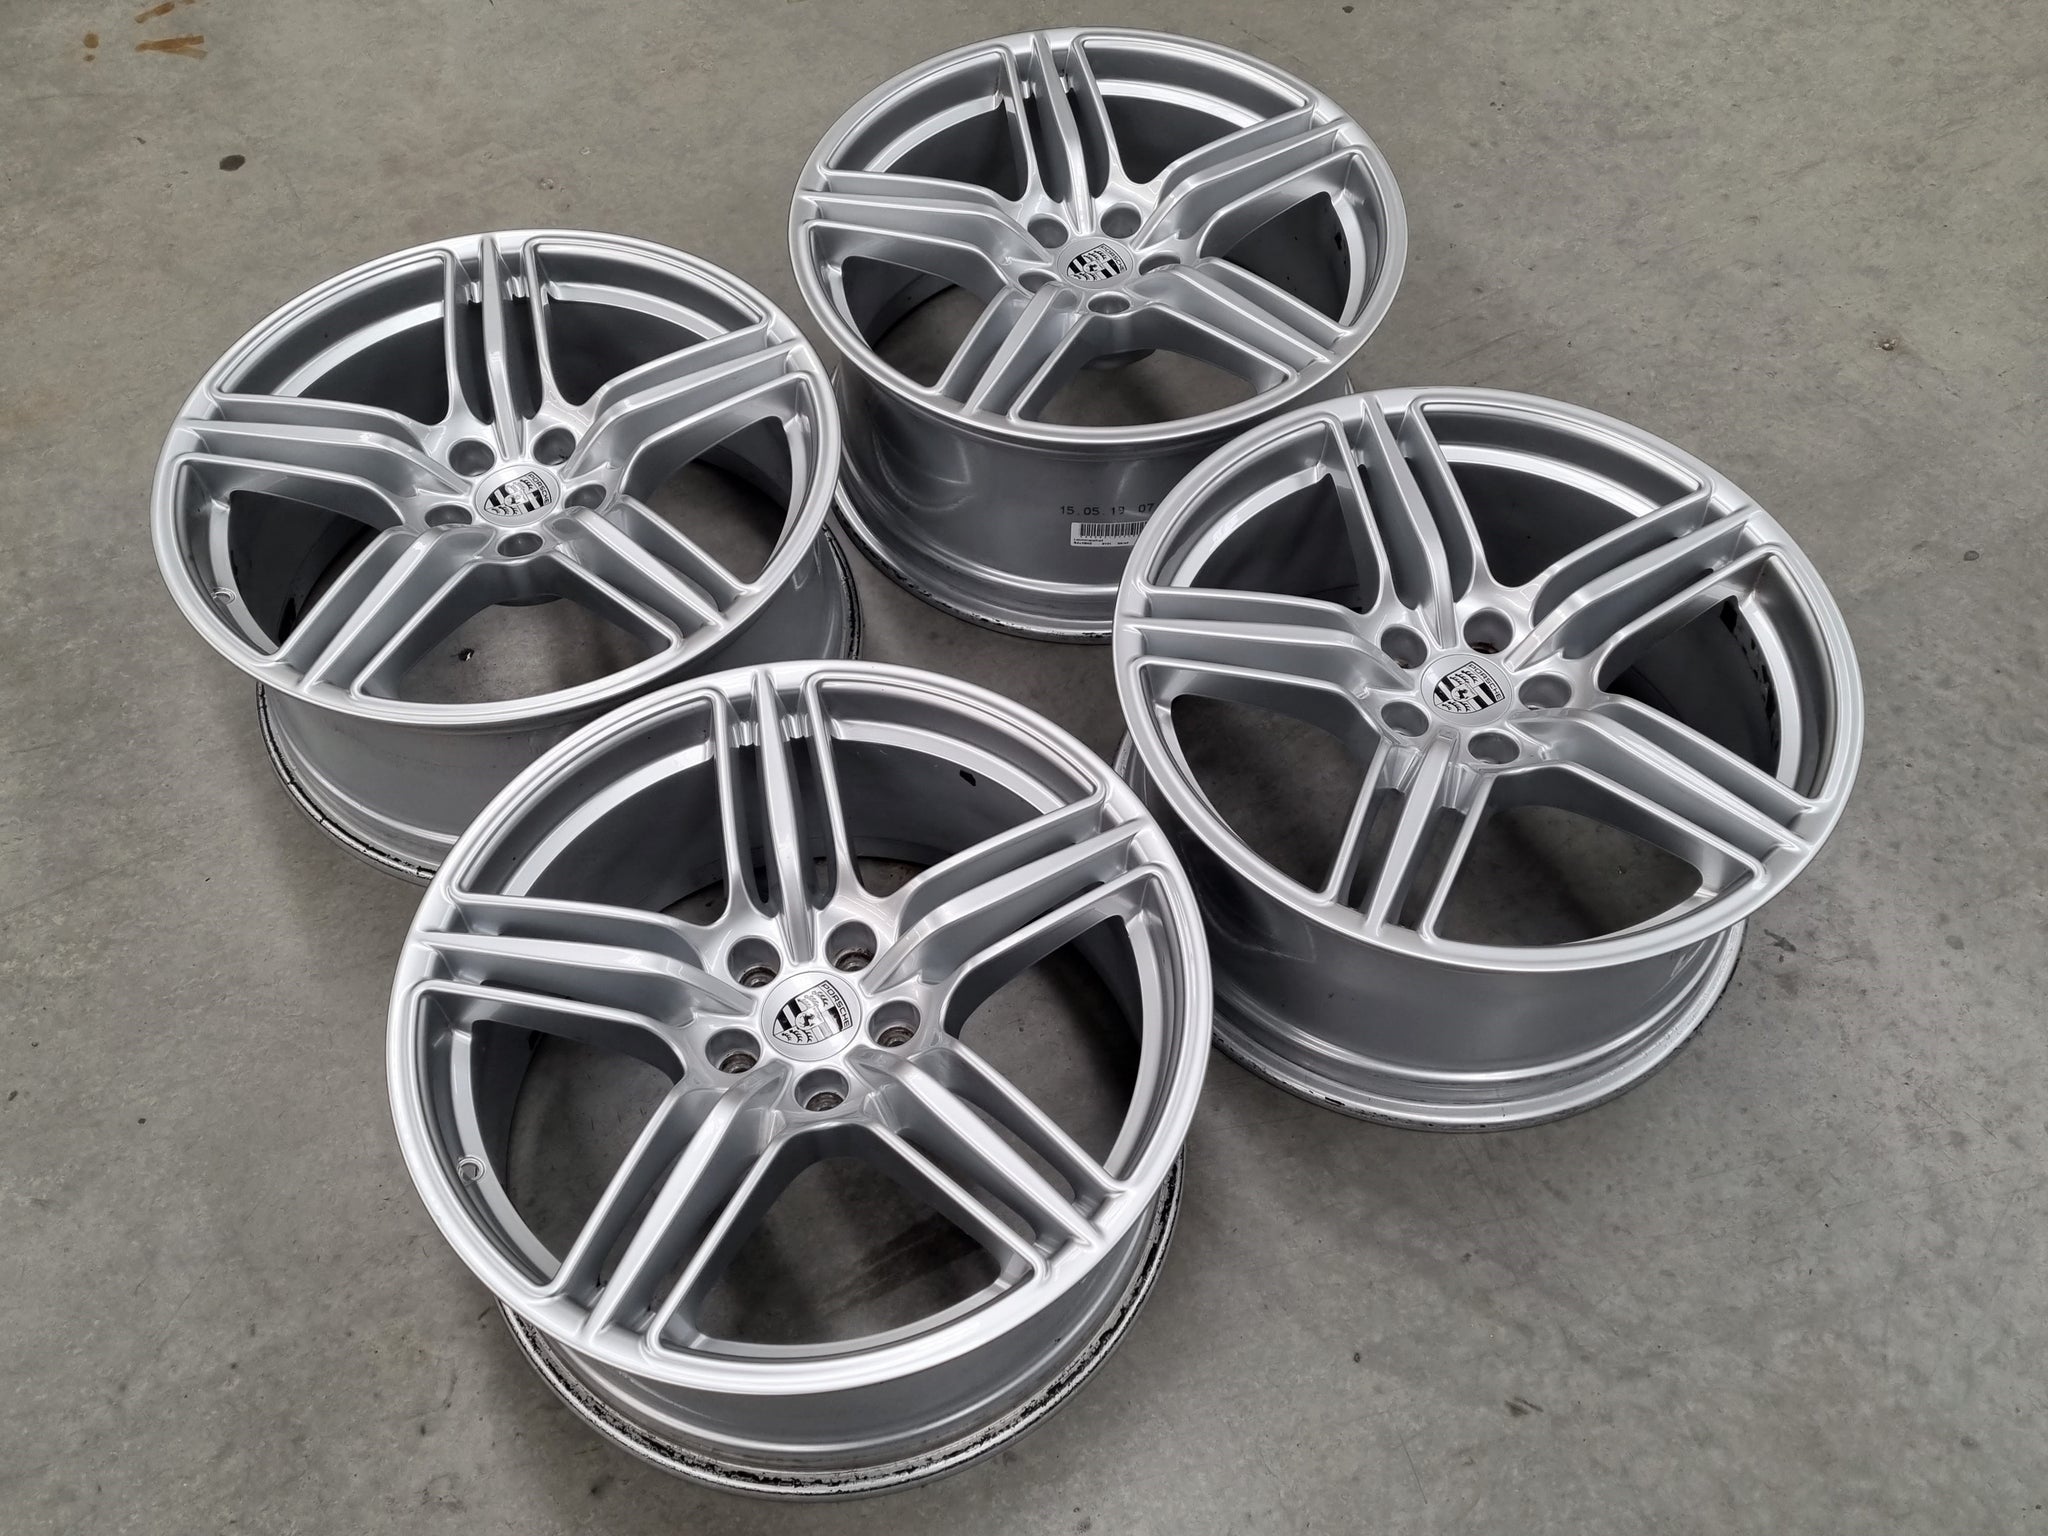 Load image into Gallery viewer, Genuine Porsche Macan 2021 Model 19 Inch Alloy Wheels Set of 4
